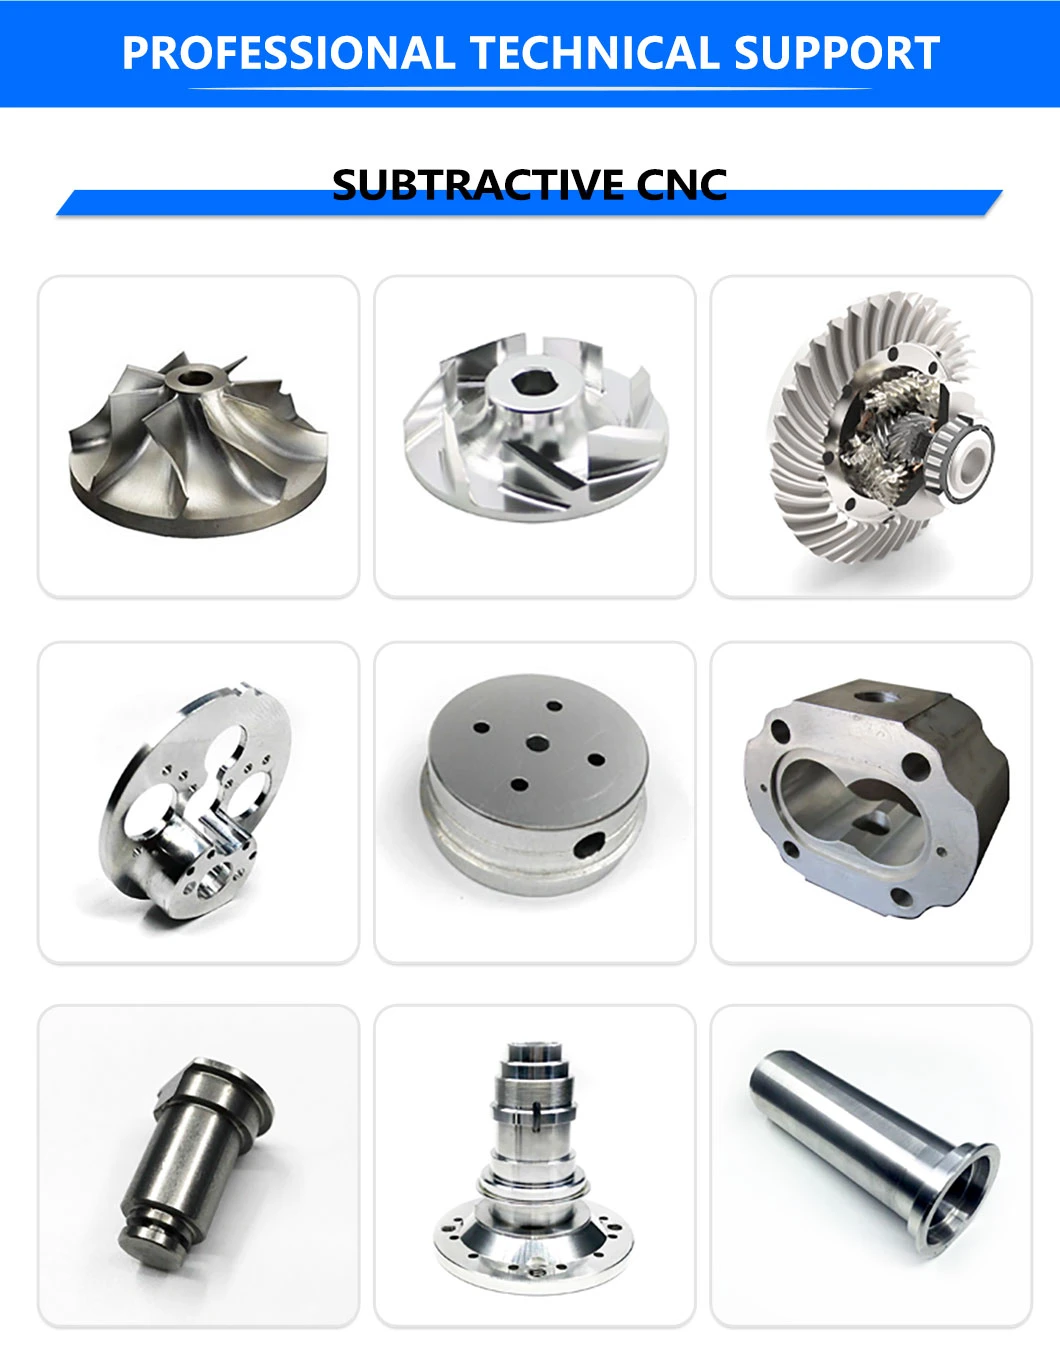 Auto/Car/Truck/Mining/Construction Machinery/Vehicle/Forklift Parts Customized by Precision Sand Casting with CNC Machining in Carbon/Alloy/Stainless Steel